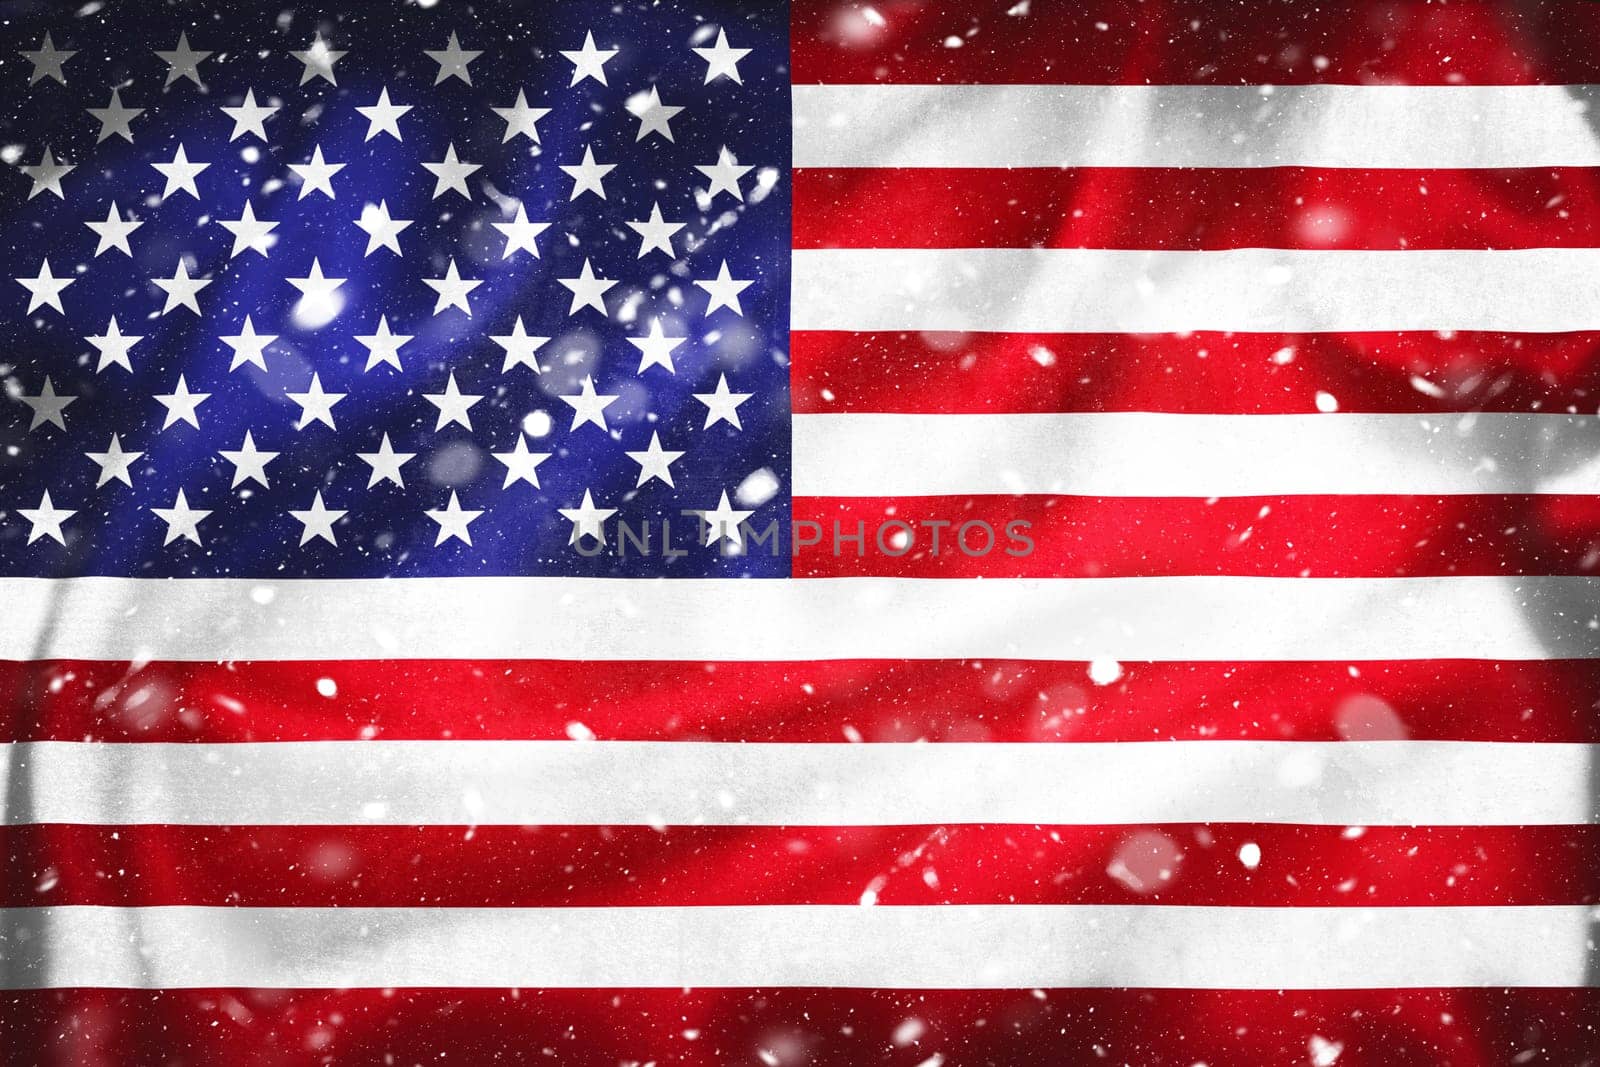 Grunge illustration of US flag with snow flakes by xbrchx